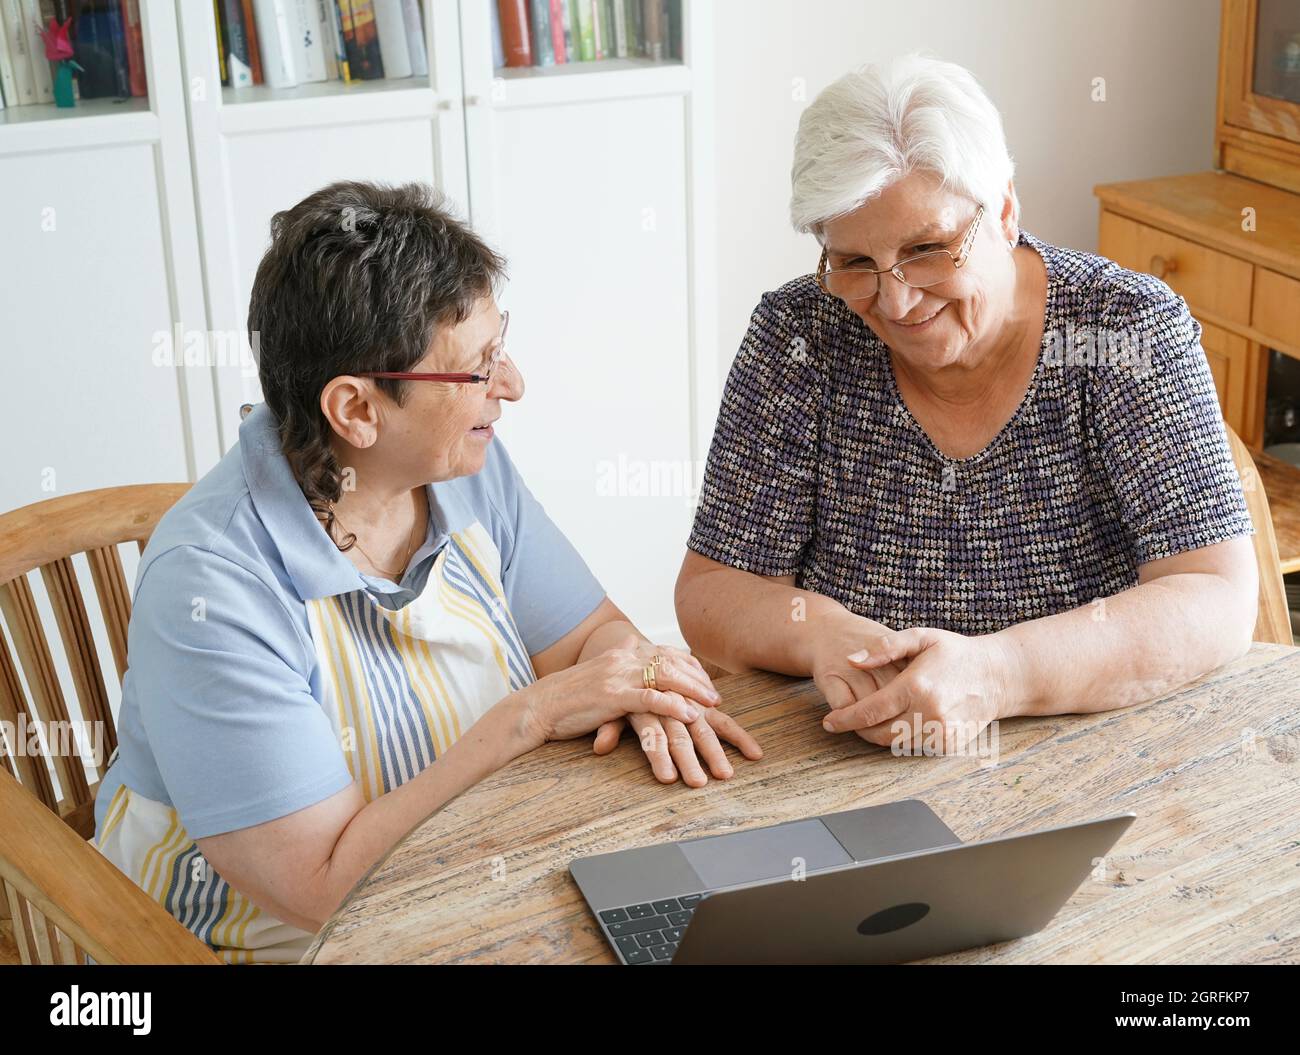 High Angle View Of Senior Friends Sitting With Laptop At Table Stock Photo